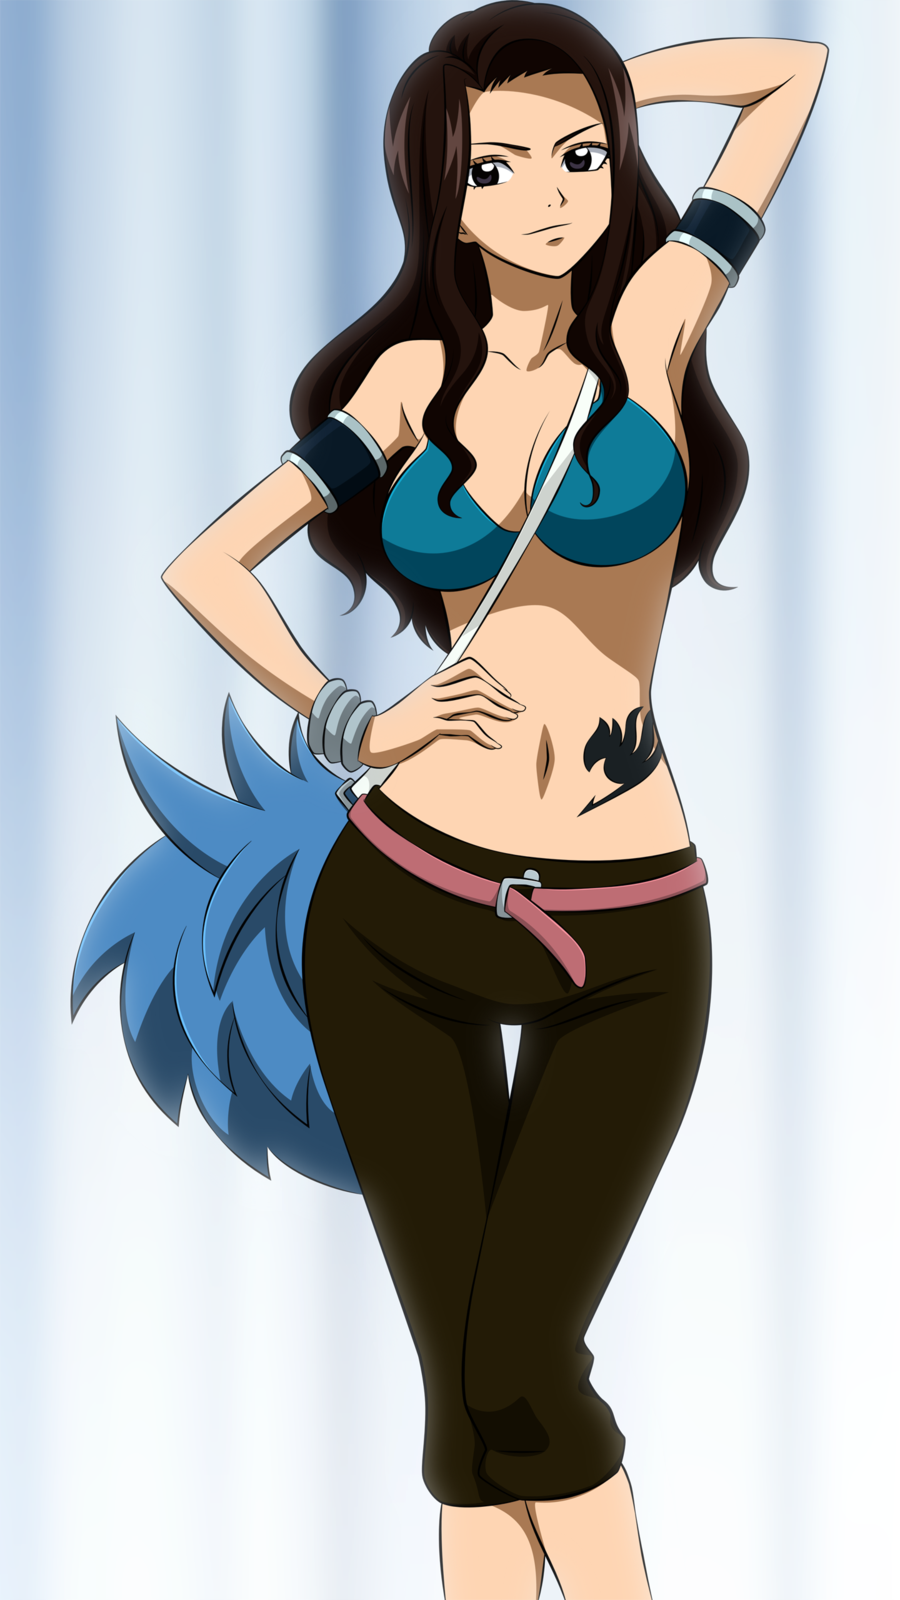 cana_alberona_posing_colored_by_kryptonstudio-d4qfoh6.png